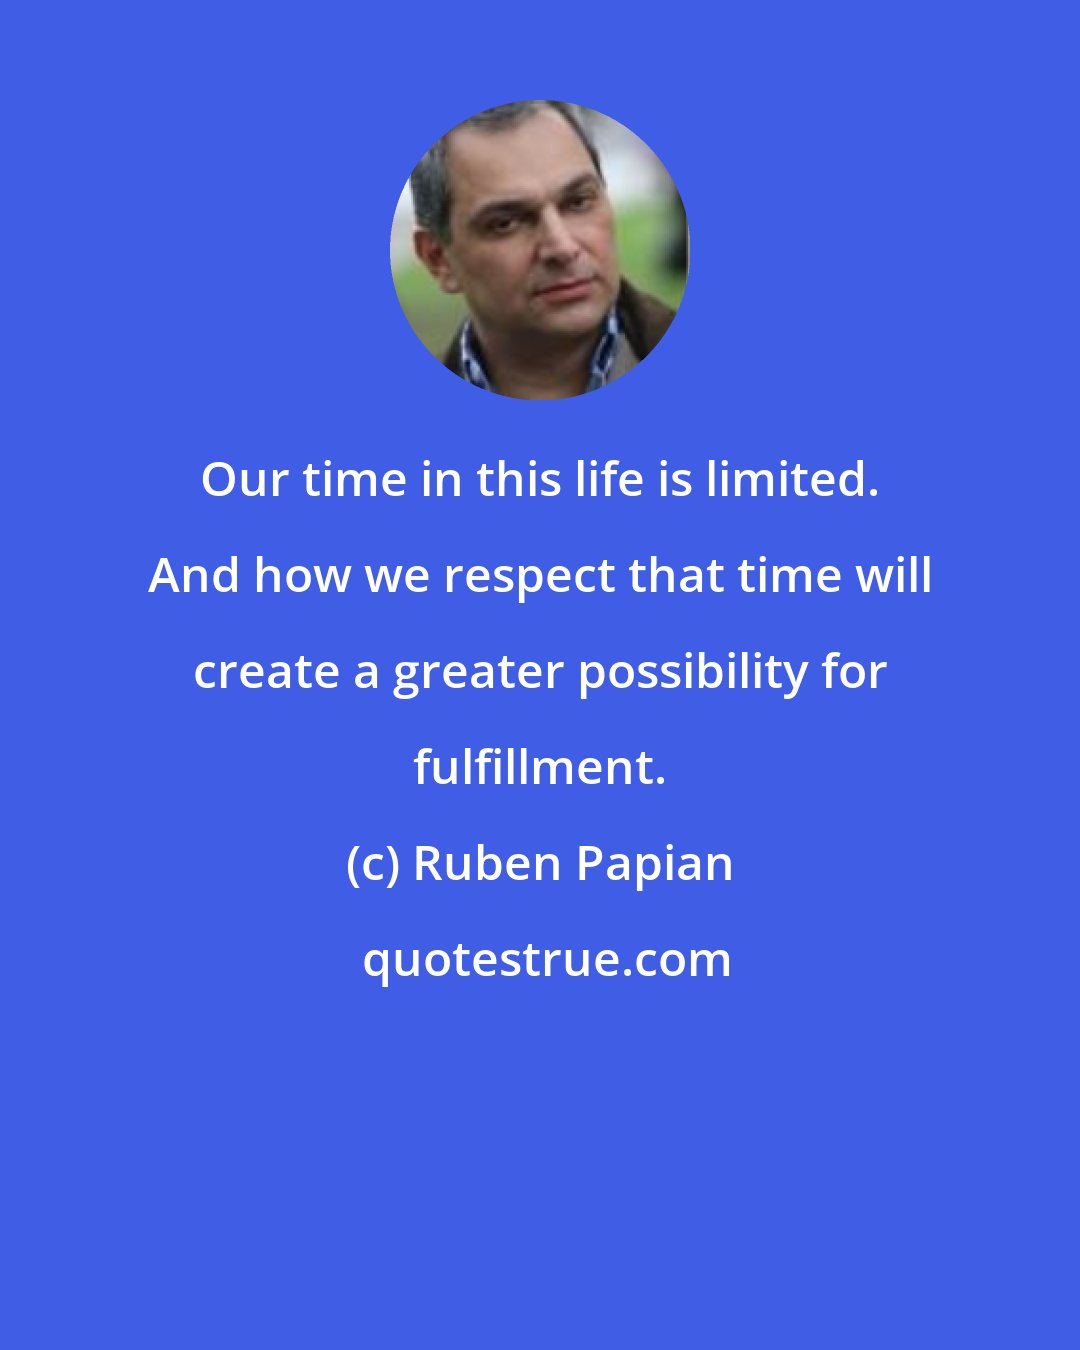 Ruben Papian: Our time in this life is limited. And how we respect that time will create a greater possibility for fulfillment.